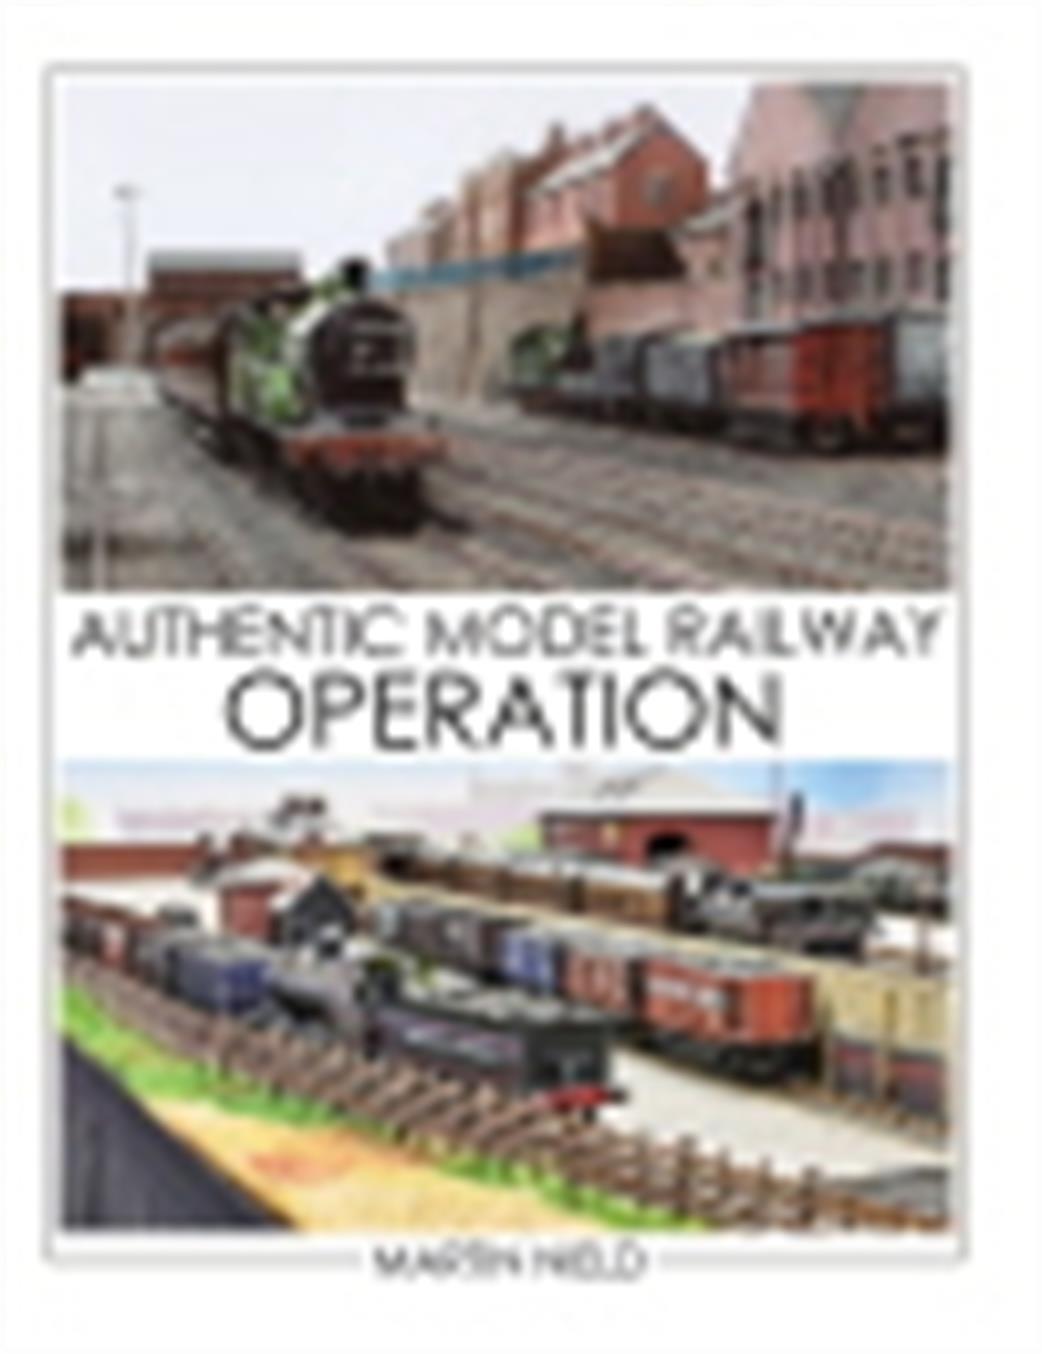 Wild Swan AMRO Authentic Model Railway Operation by Martin Nield